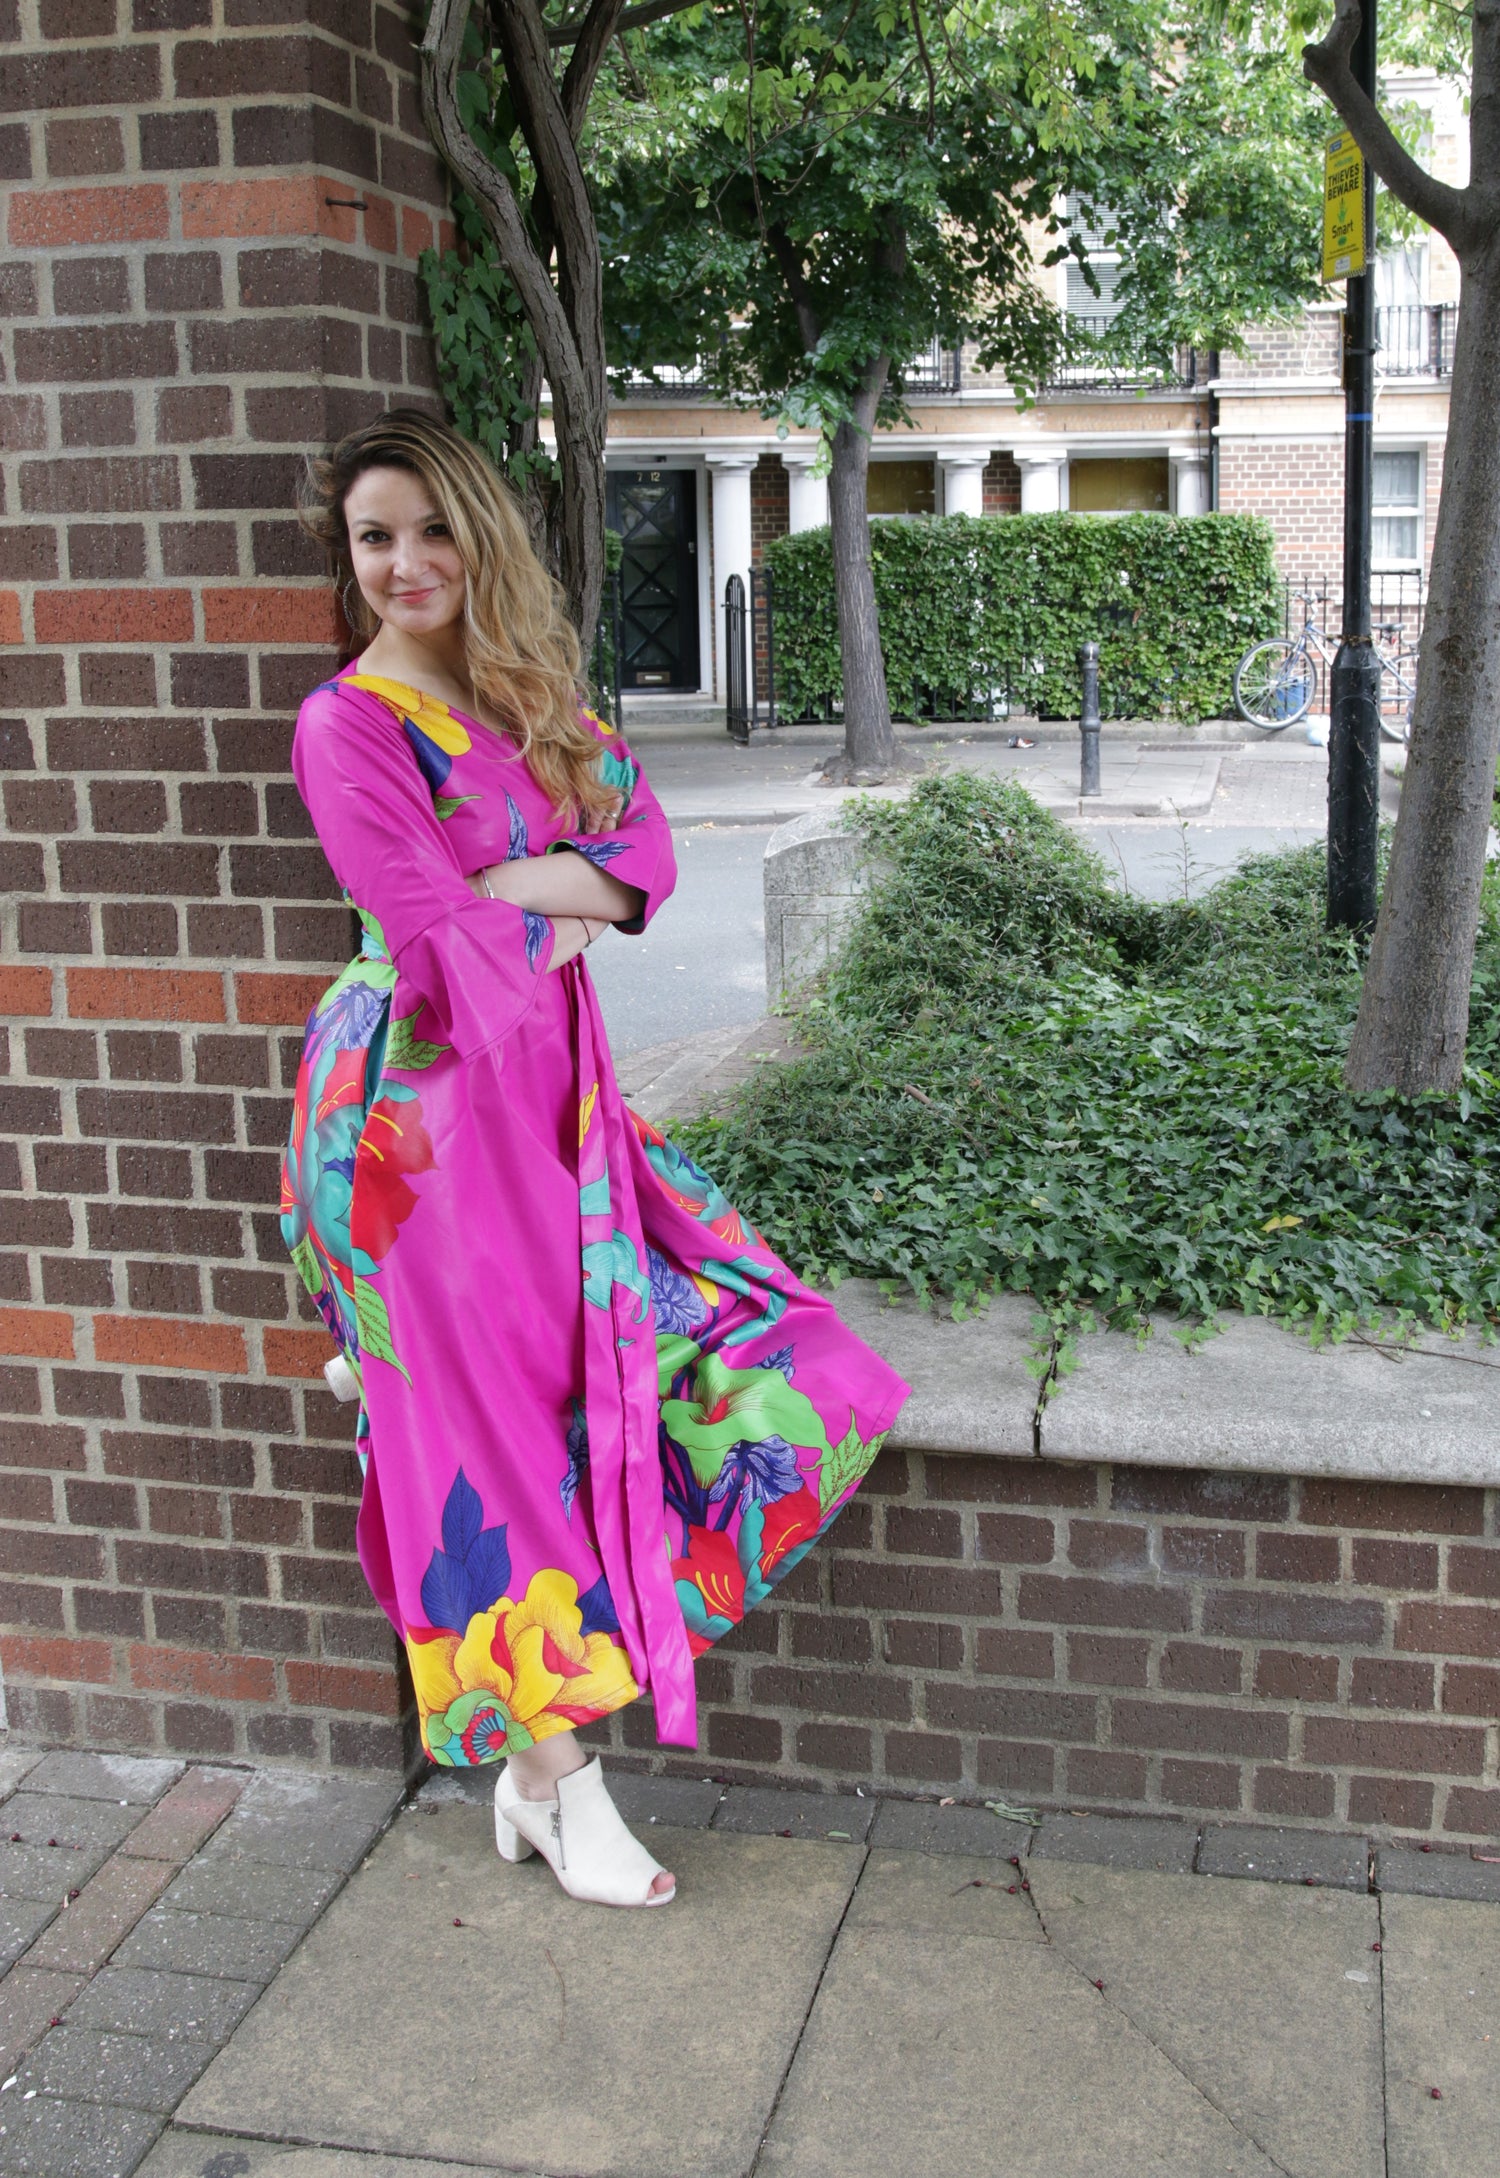 Ioana wearing a strong pink dress with flower prints and leaning against a brick pillar. In the background there are plants and trees